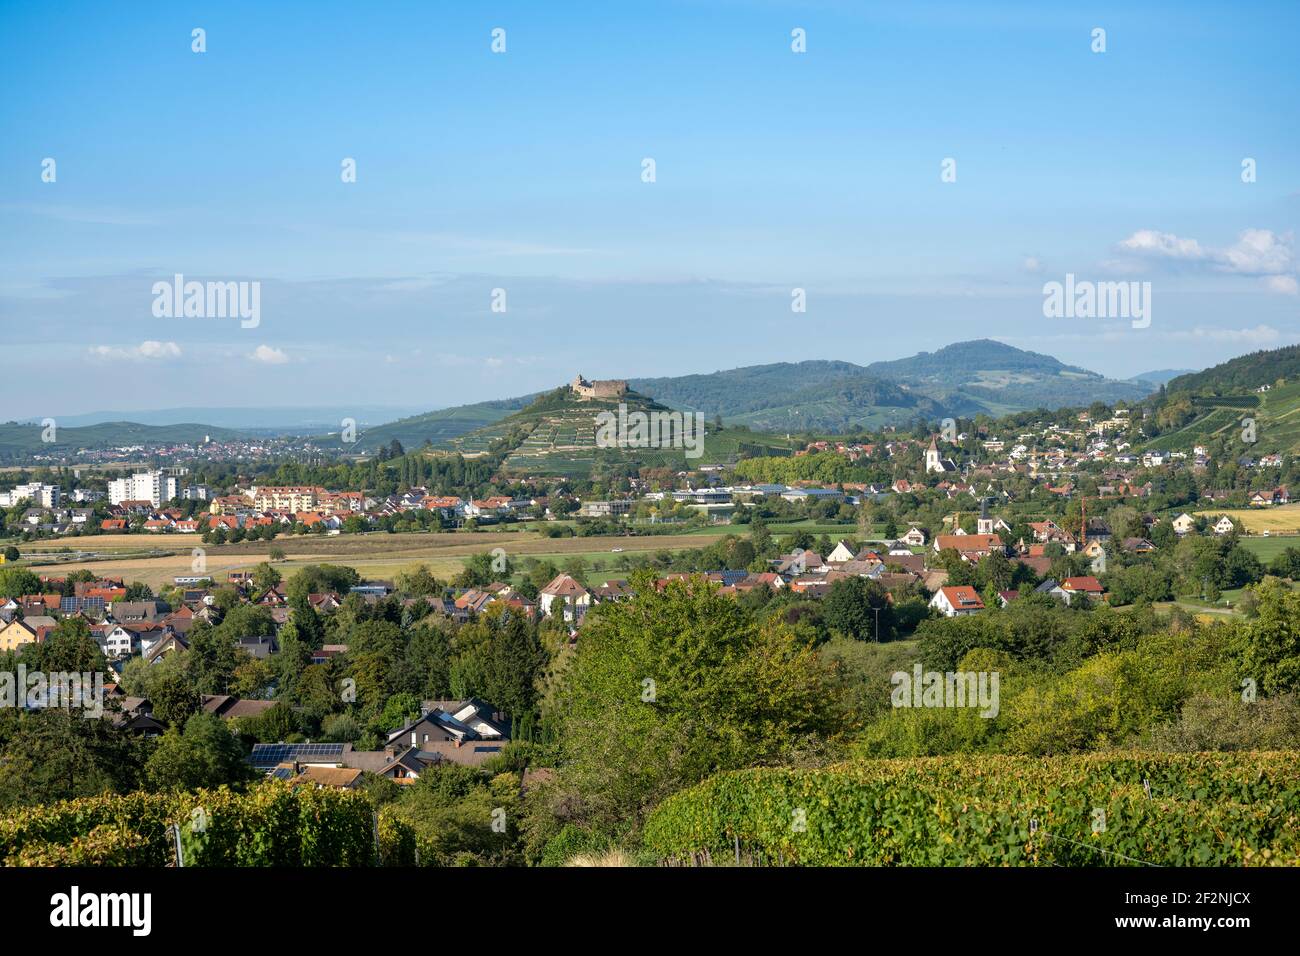 Germany, Baden-Wuerttemberg, Staufen, view of Staufen from the south. Stock Photo